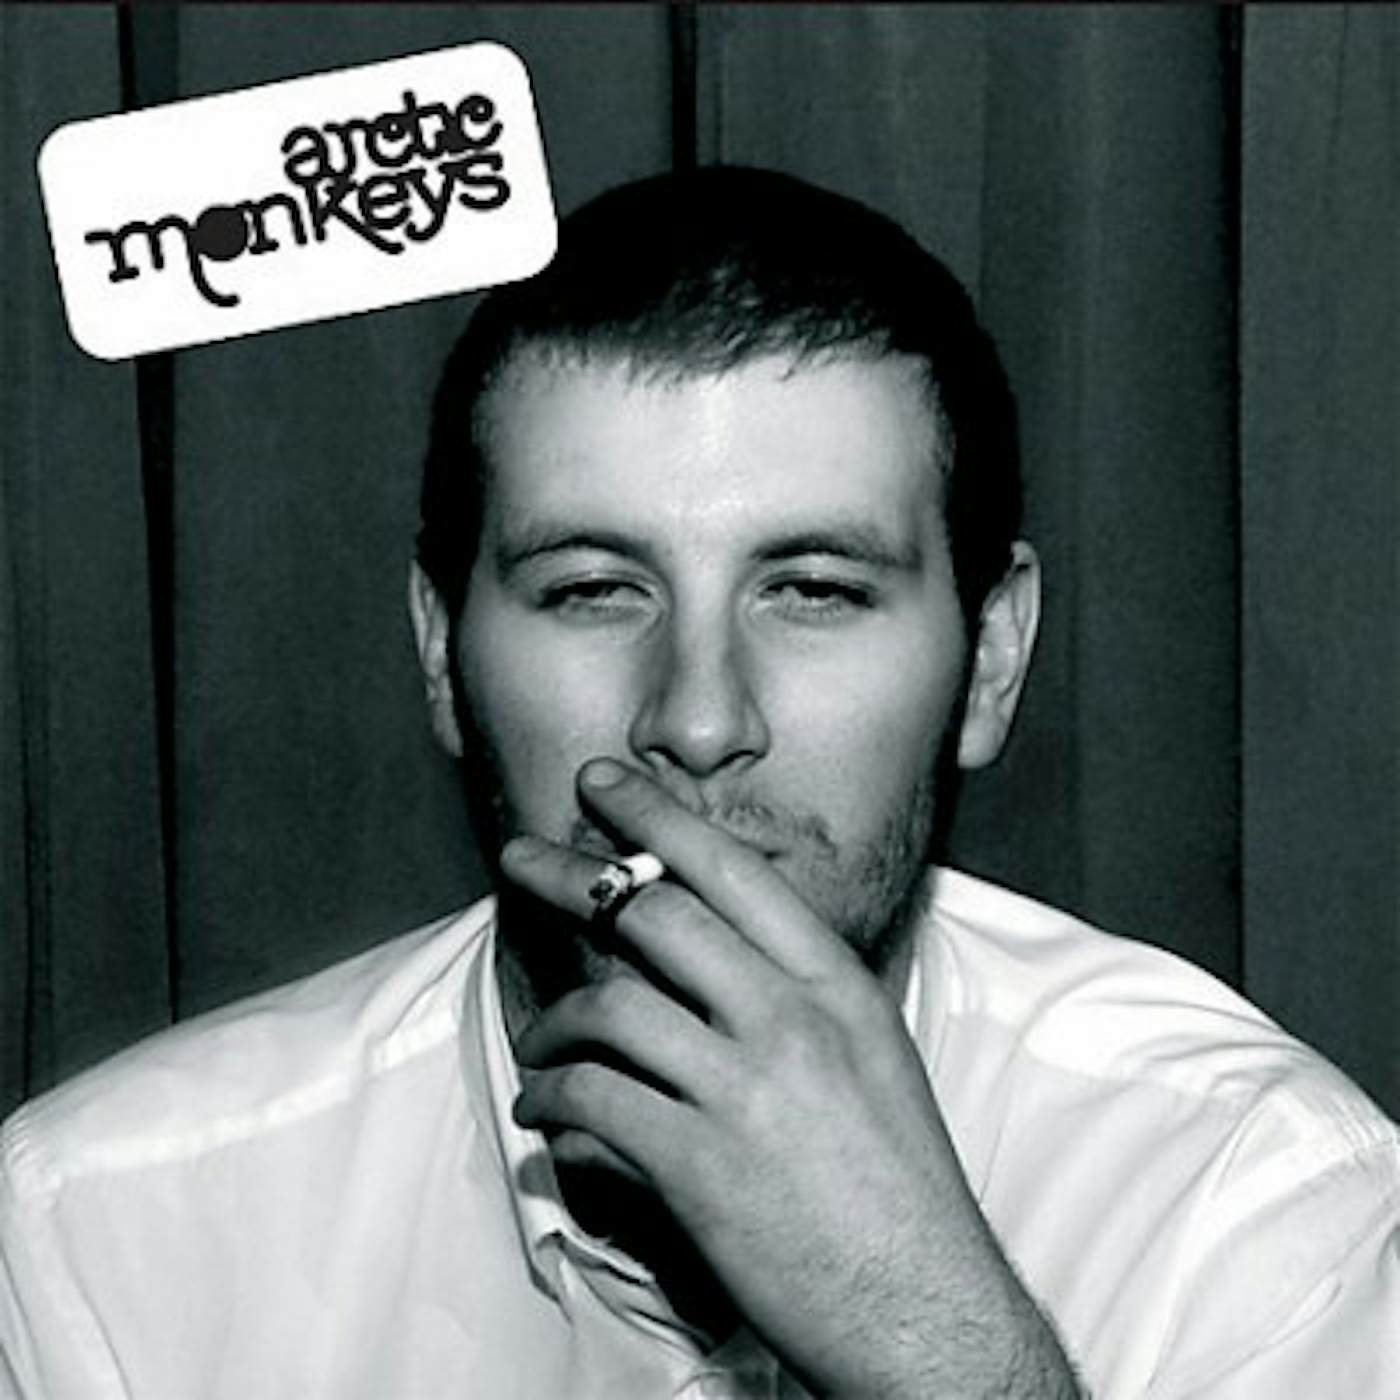 Arctic Monkeys WHATEVER PEOPLE SAY I AM THAT'S WHAT I AM NOT Vinyl Record